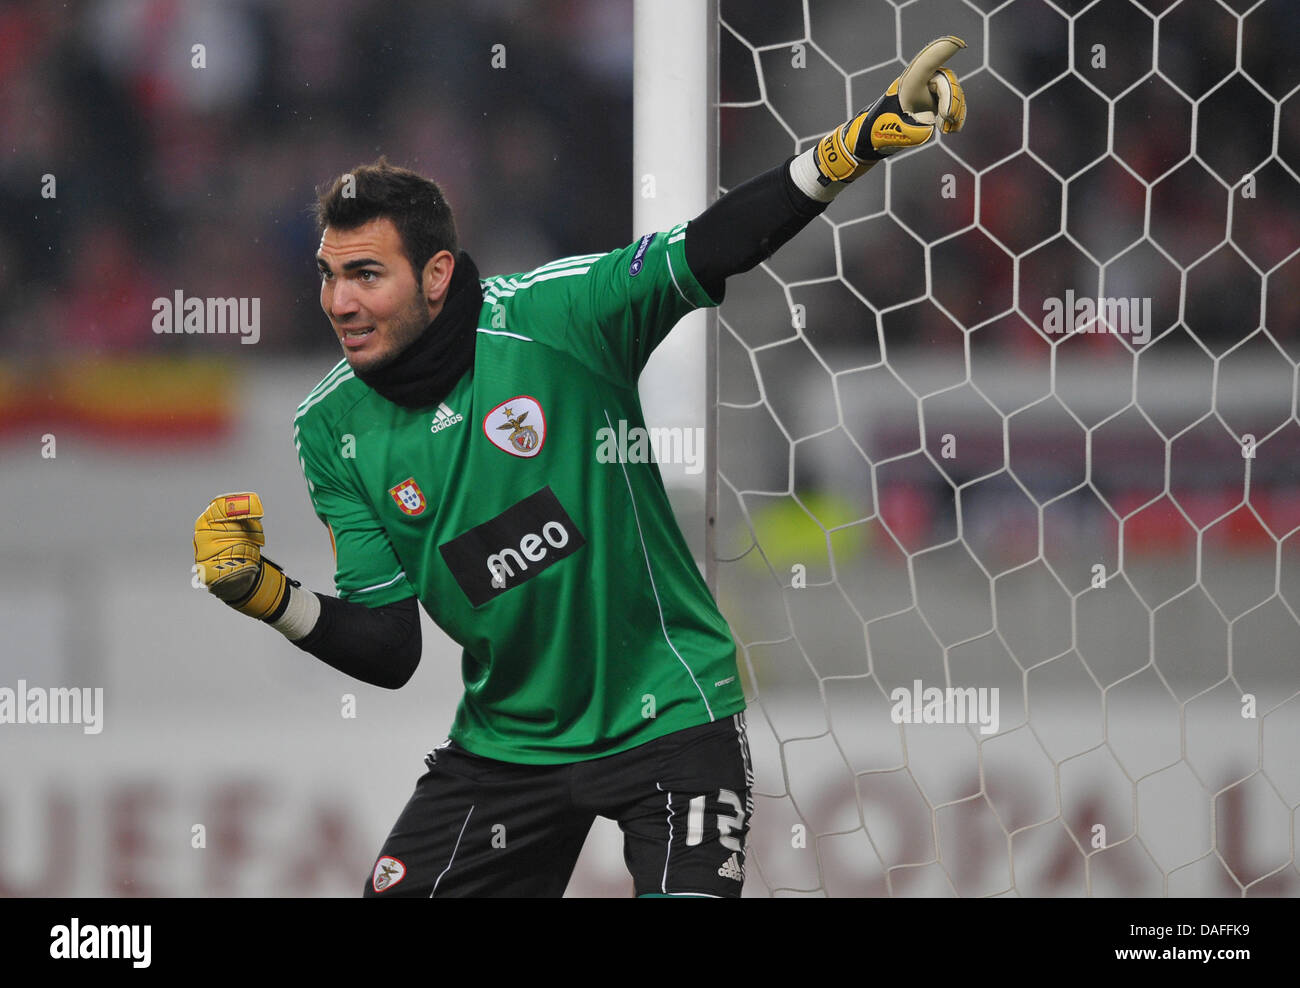 Benfica's goalie Jimenez Roberto gestures during the UEFA Europa League round of 32 second leg VfB Stuttgart v Benfica Lisbon in Stuttgart 24 February 2011. Benfica won the match with 2-0 and moves up to round of 16 winning 4-1 on aggregate. Photo: Uwe Anspach Stock Photo